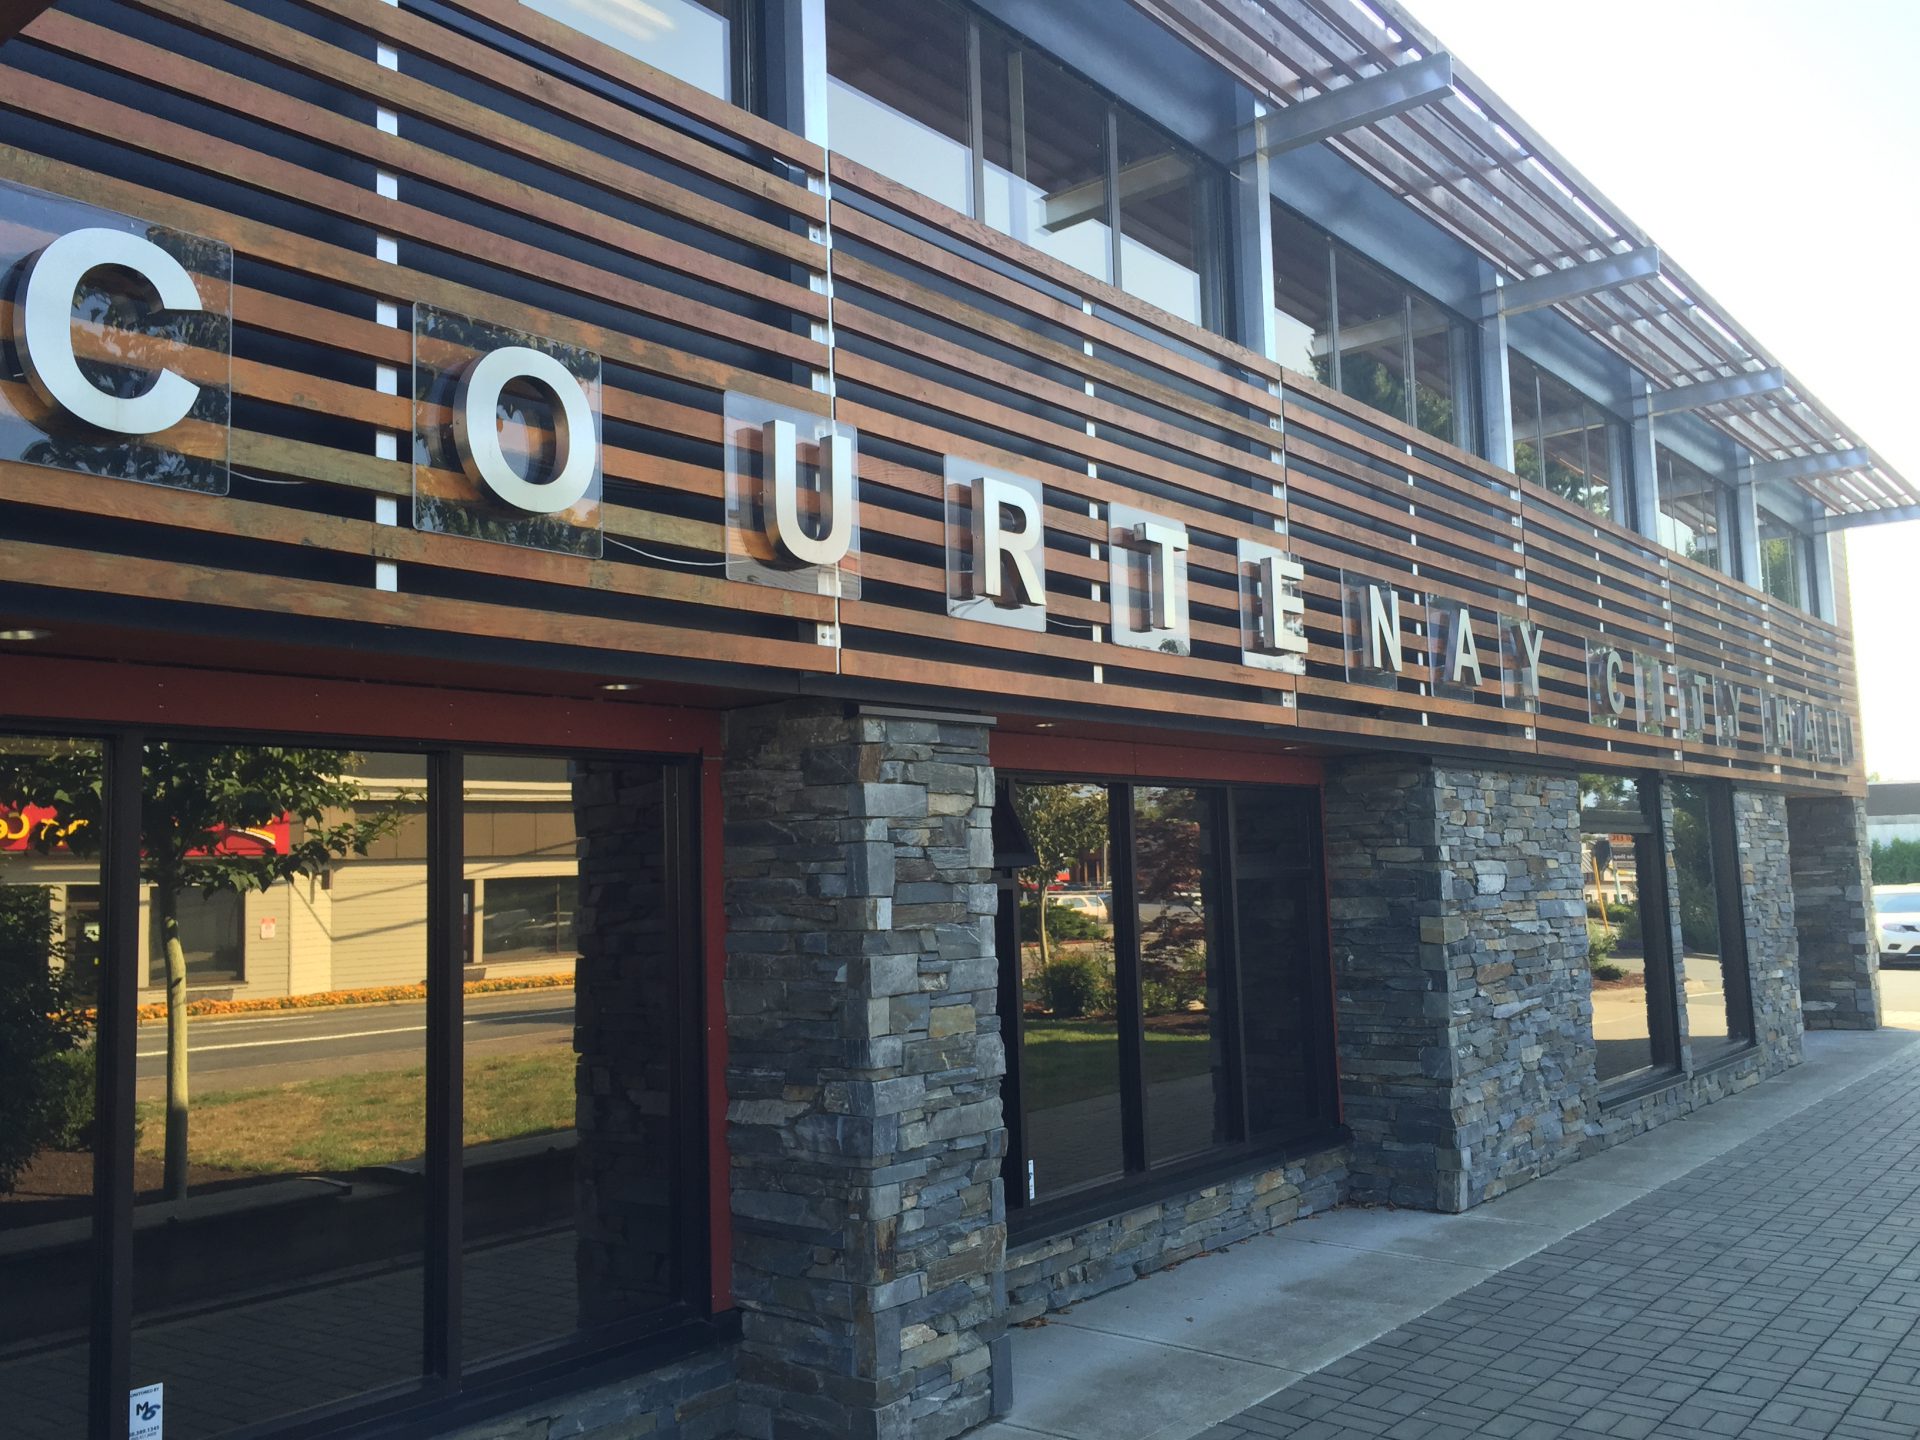 City of Courtenay cuts development application red tape